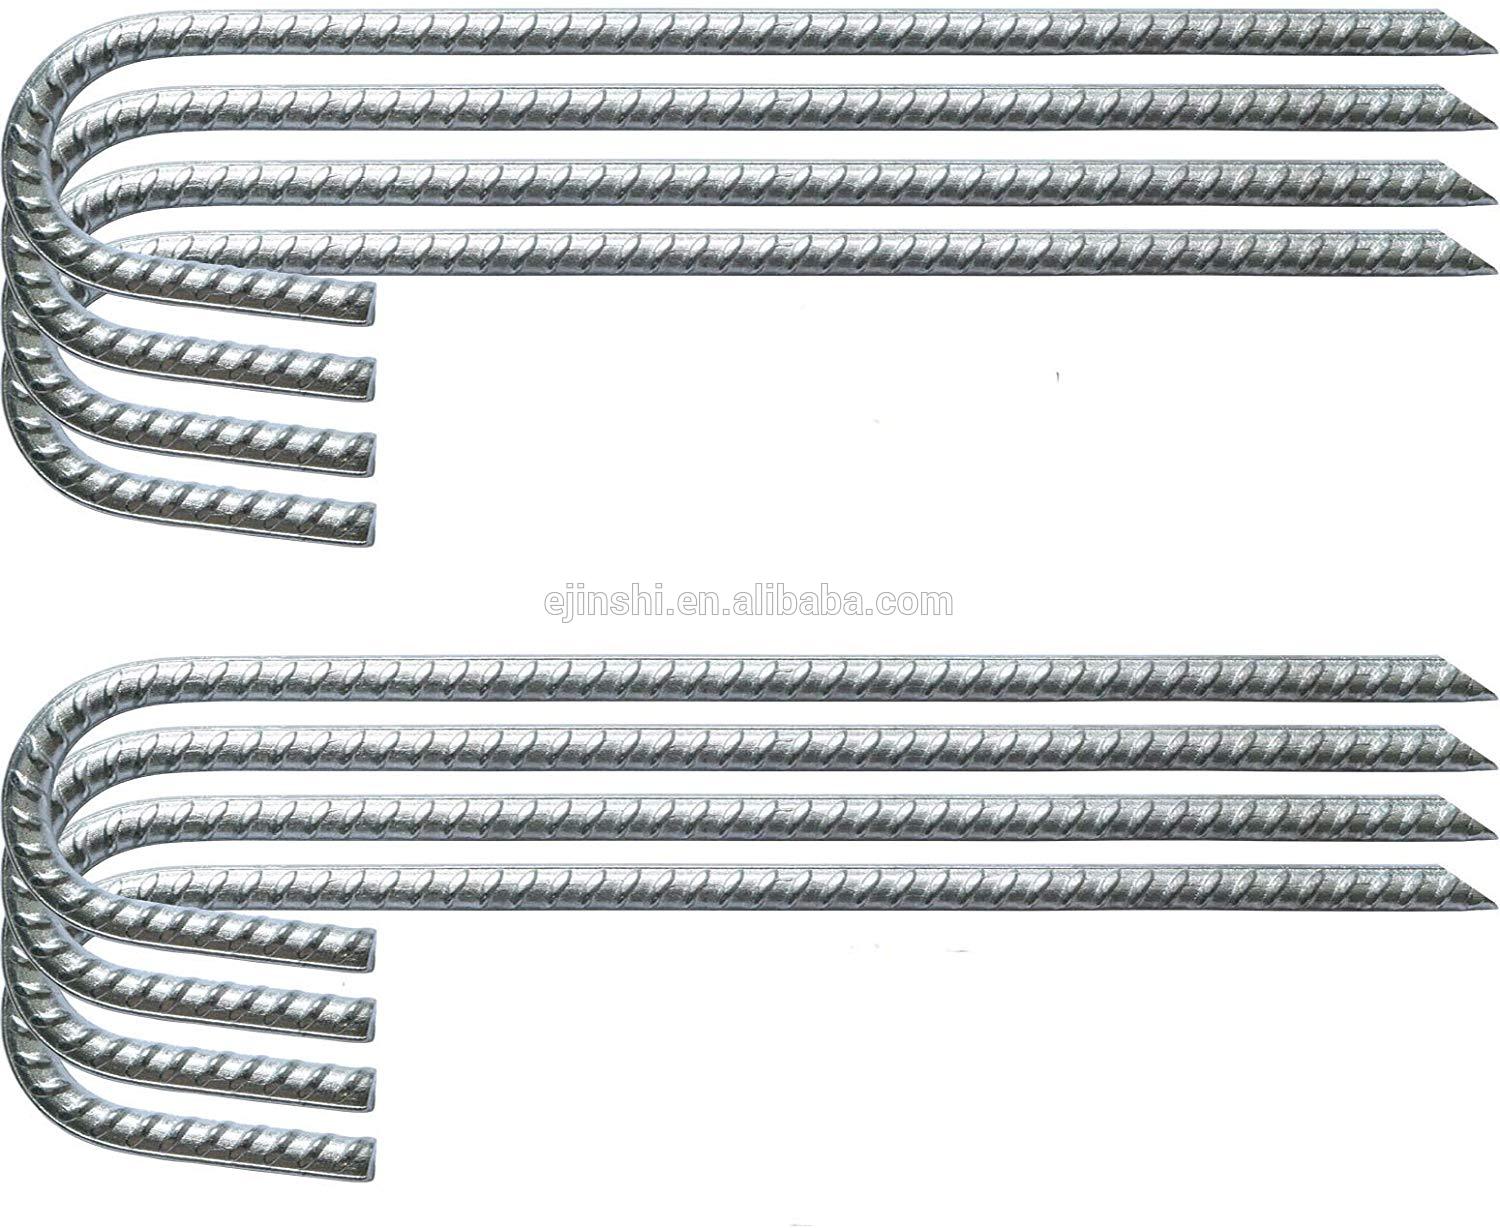 China Heavy Duty Steel Ground Anchors Galvanized Rebar Stakes J Hook  factory and suppliers